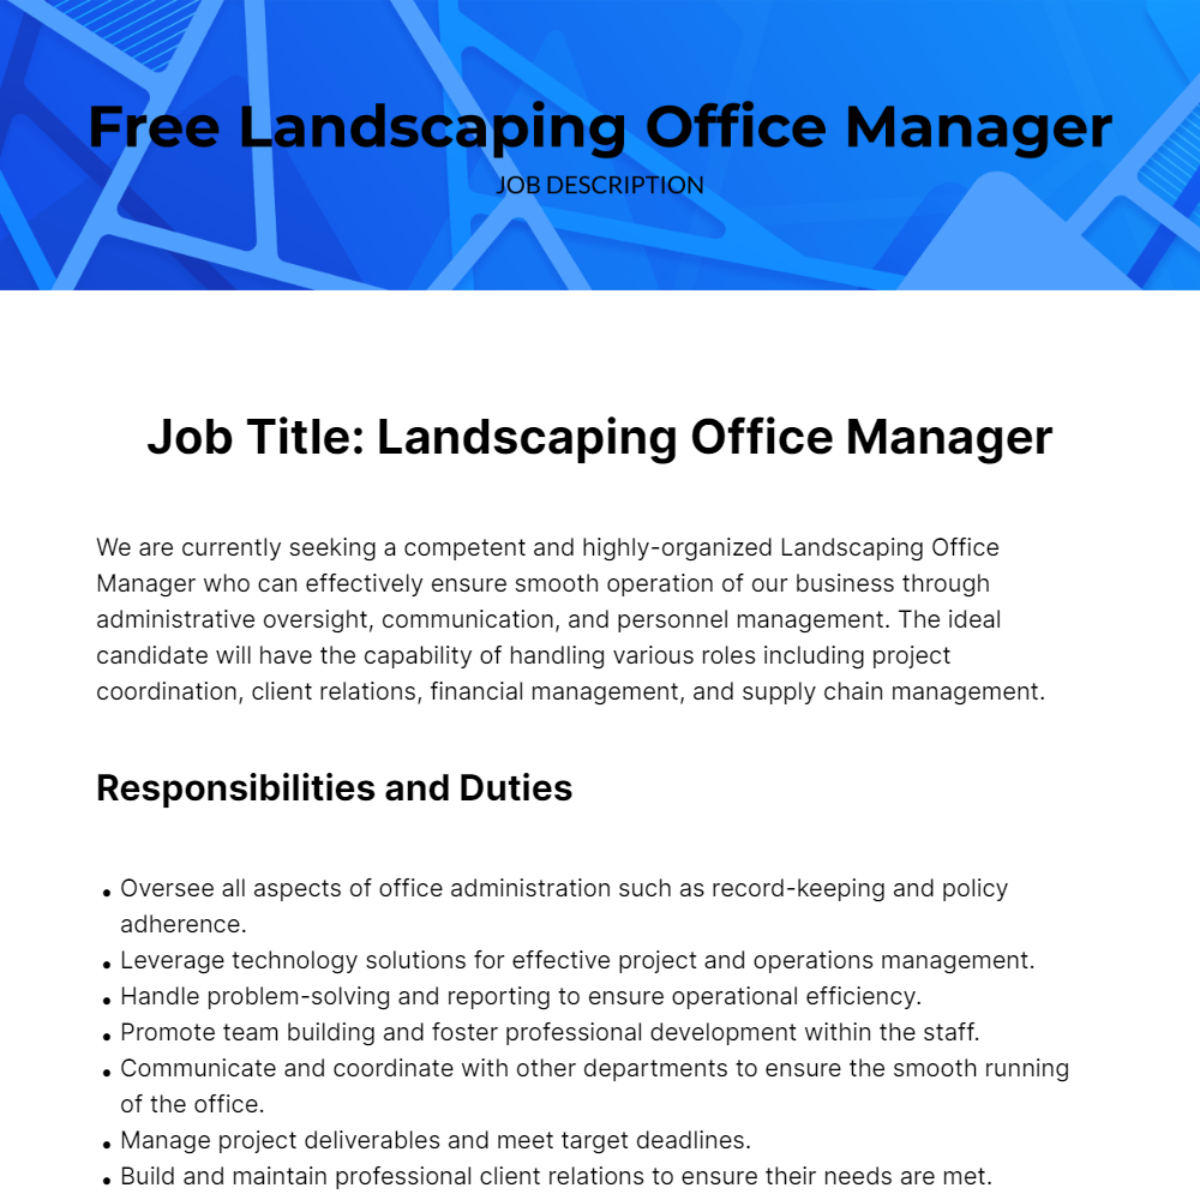 Free Landscaping Office Manager Job Description Template